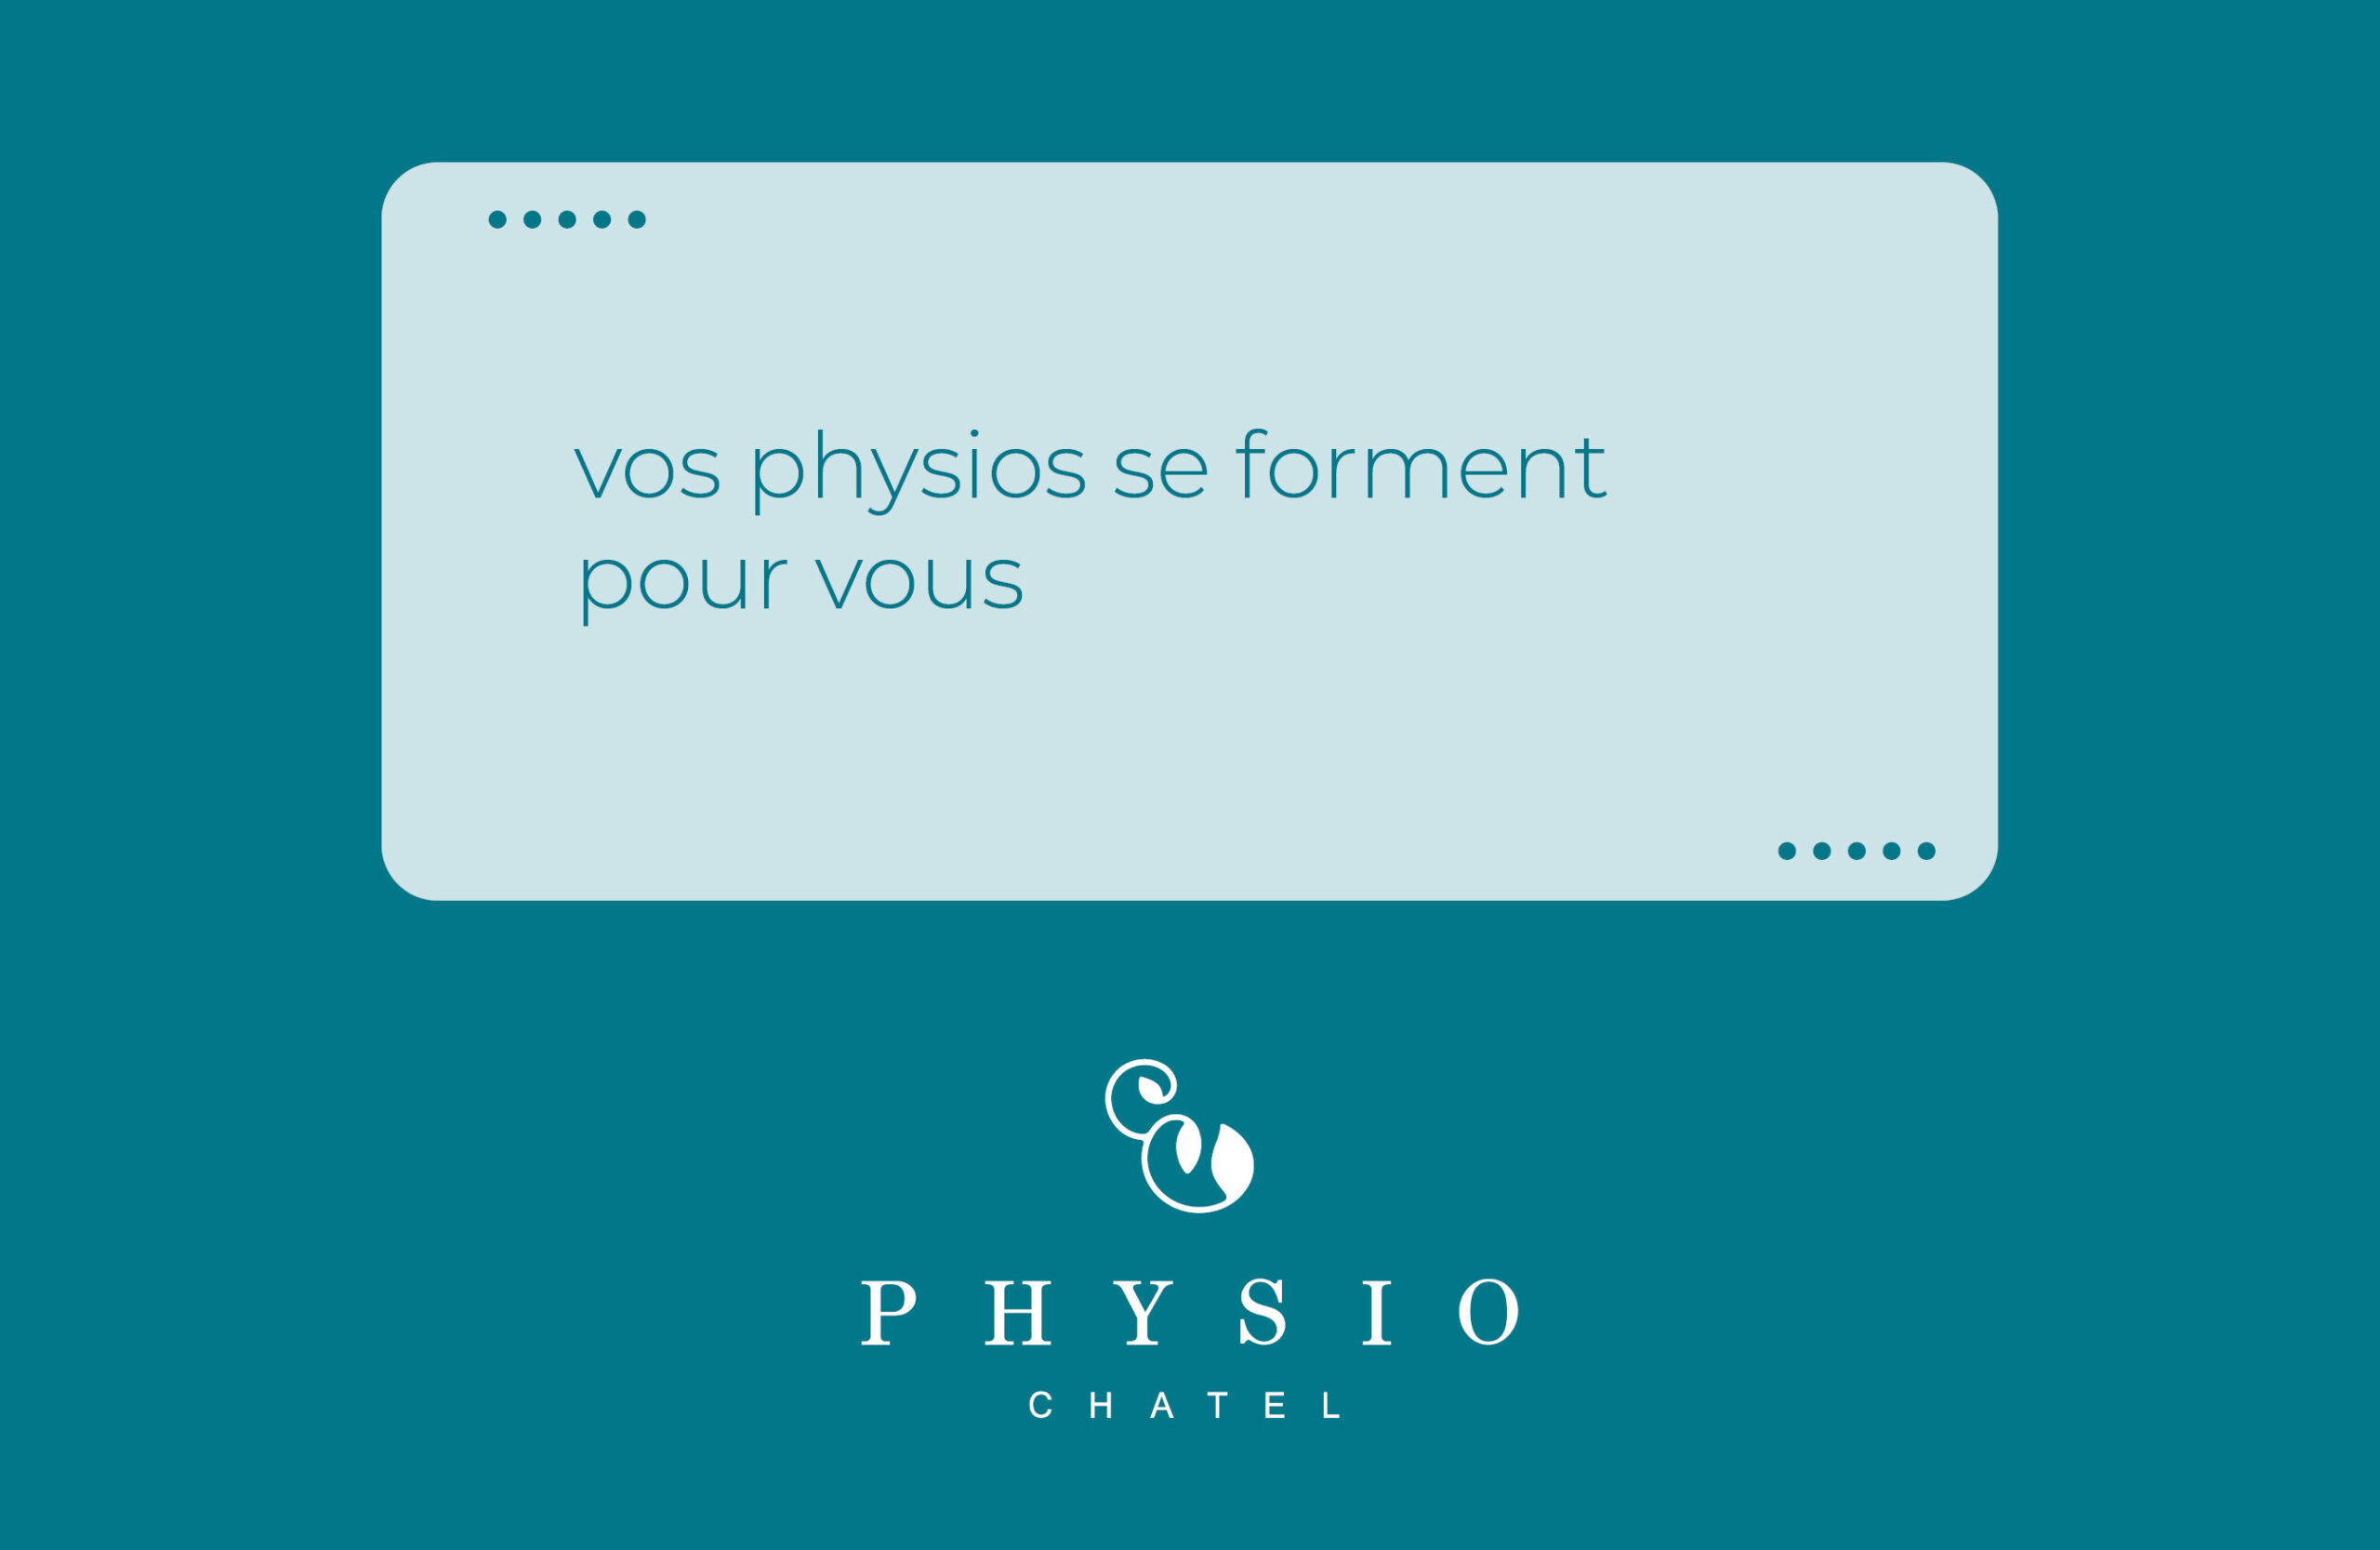 Vos physios se forment